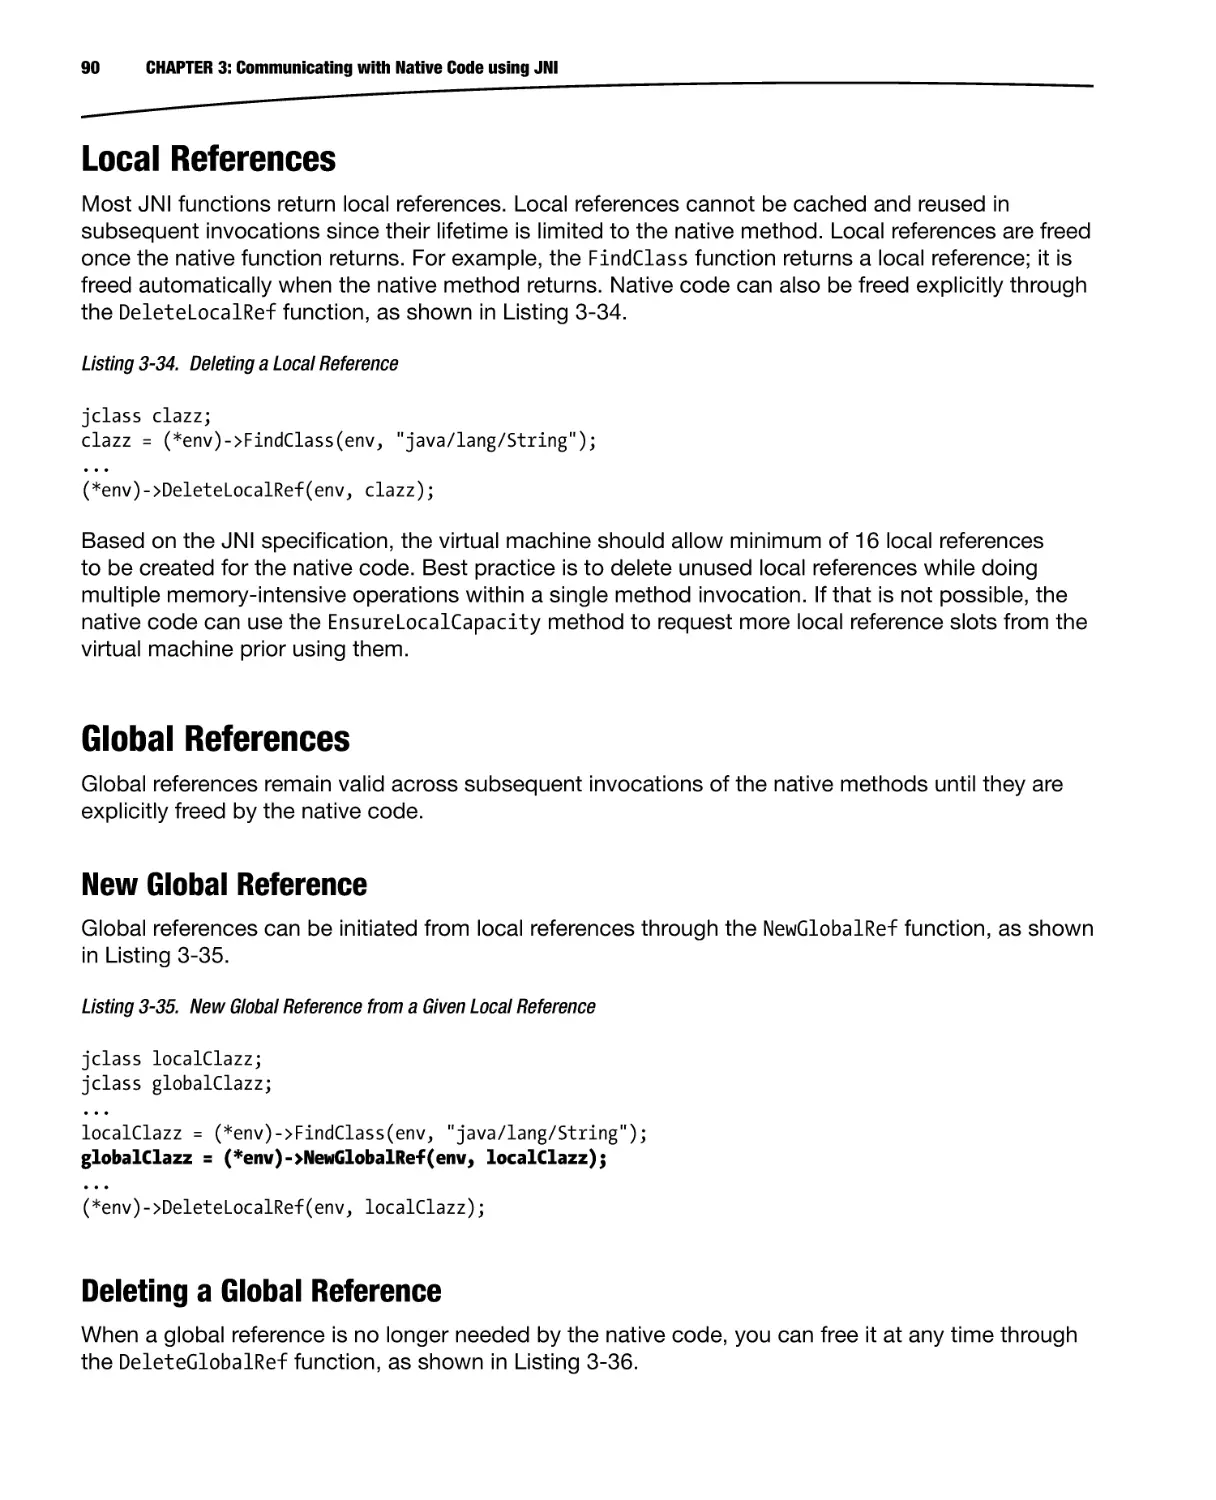 Local References
Global References
New Global Reference
Deleting a Global Reference